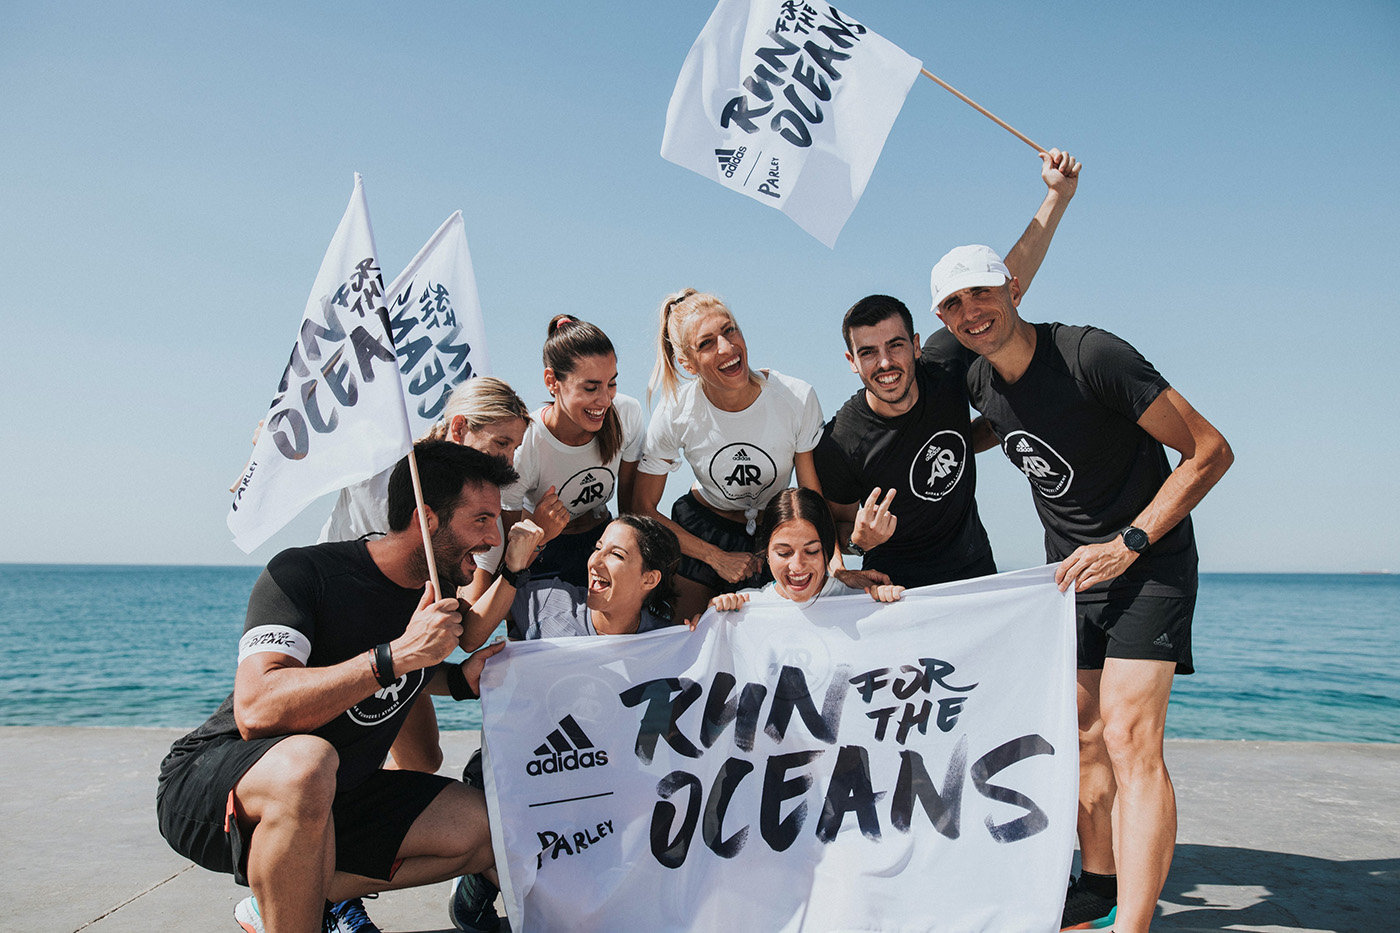 adidas x Parley “RUN FOR THE OCEANS”